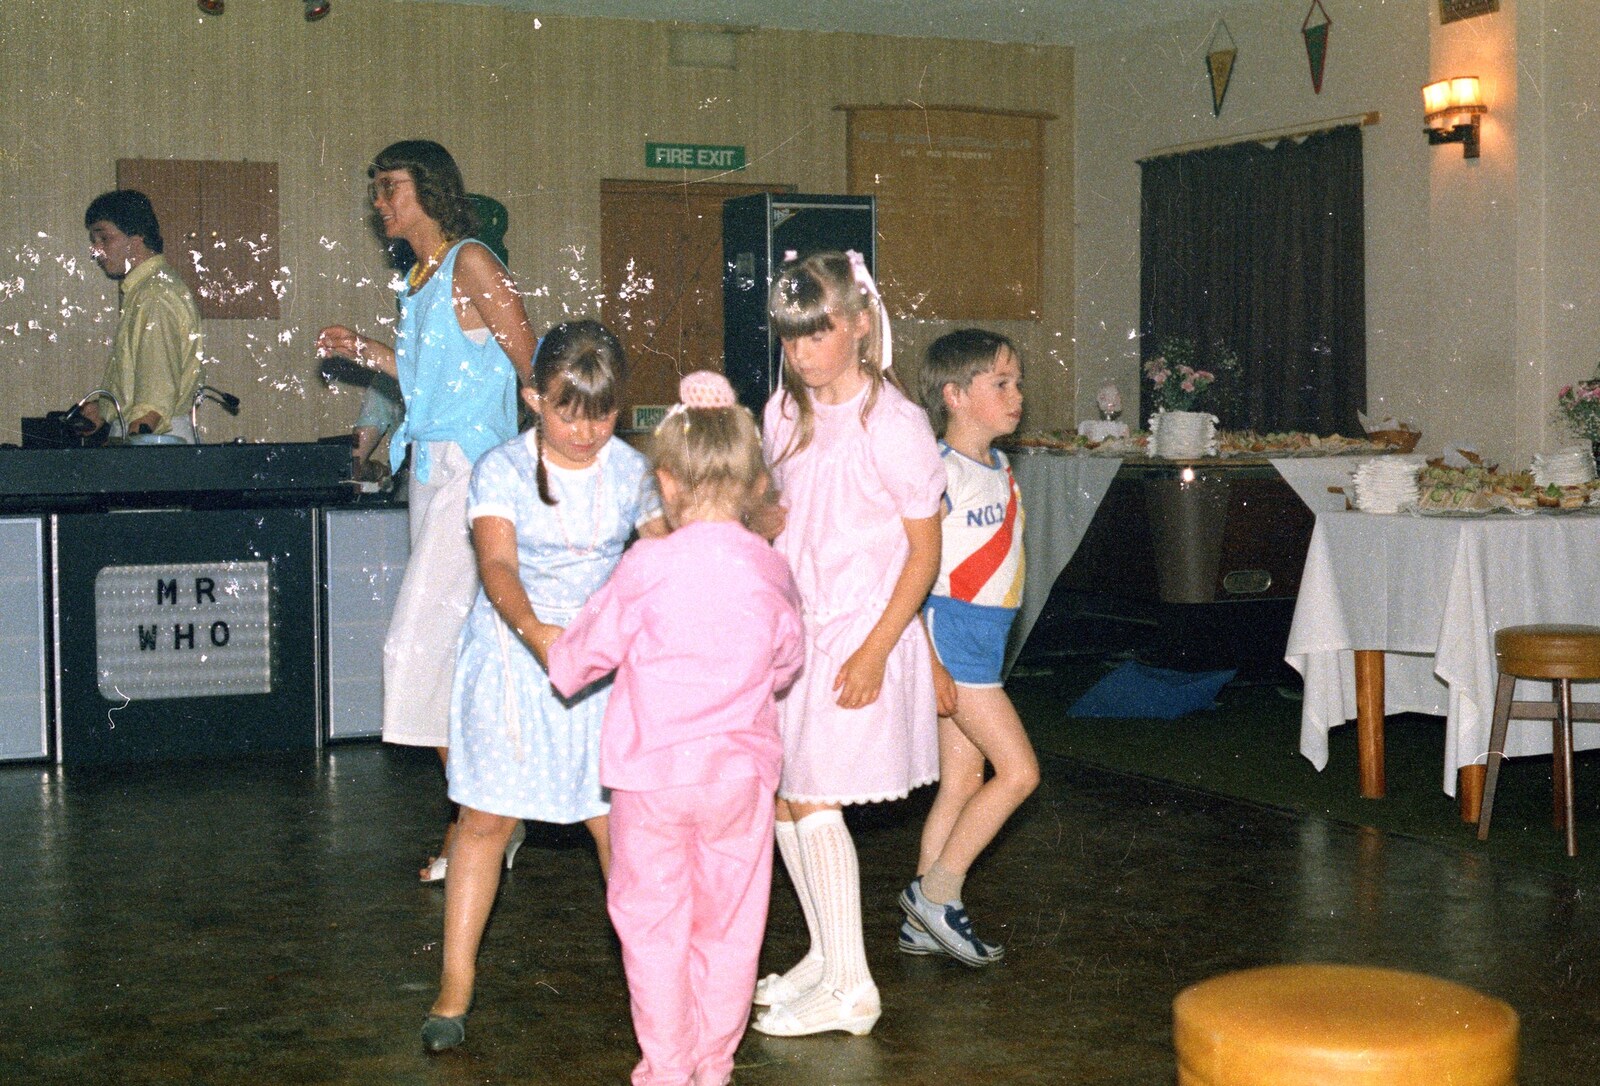 Children dancing from A CB Wedding and a Derelict Railway, Hampshire - 20th July 1986